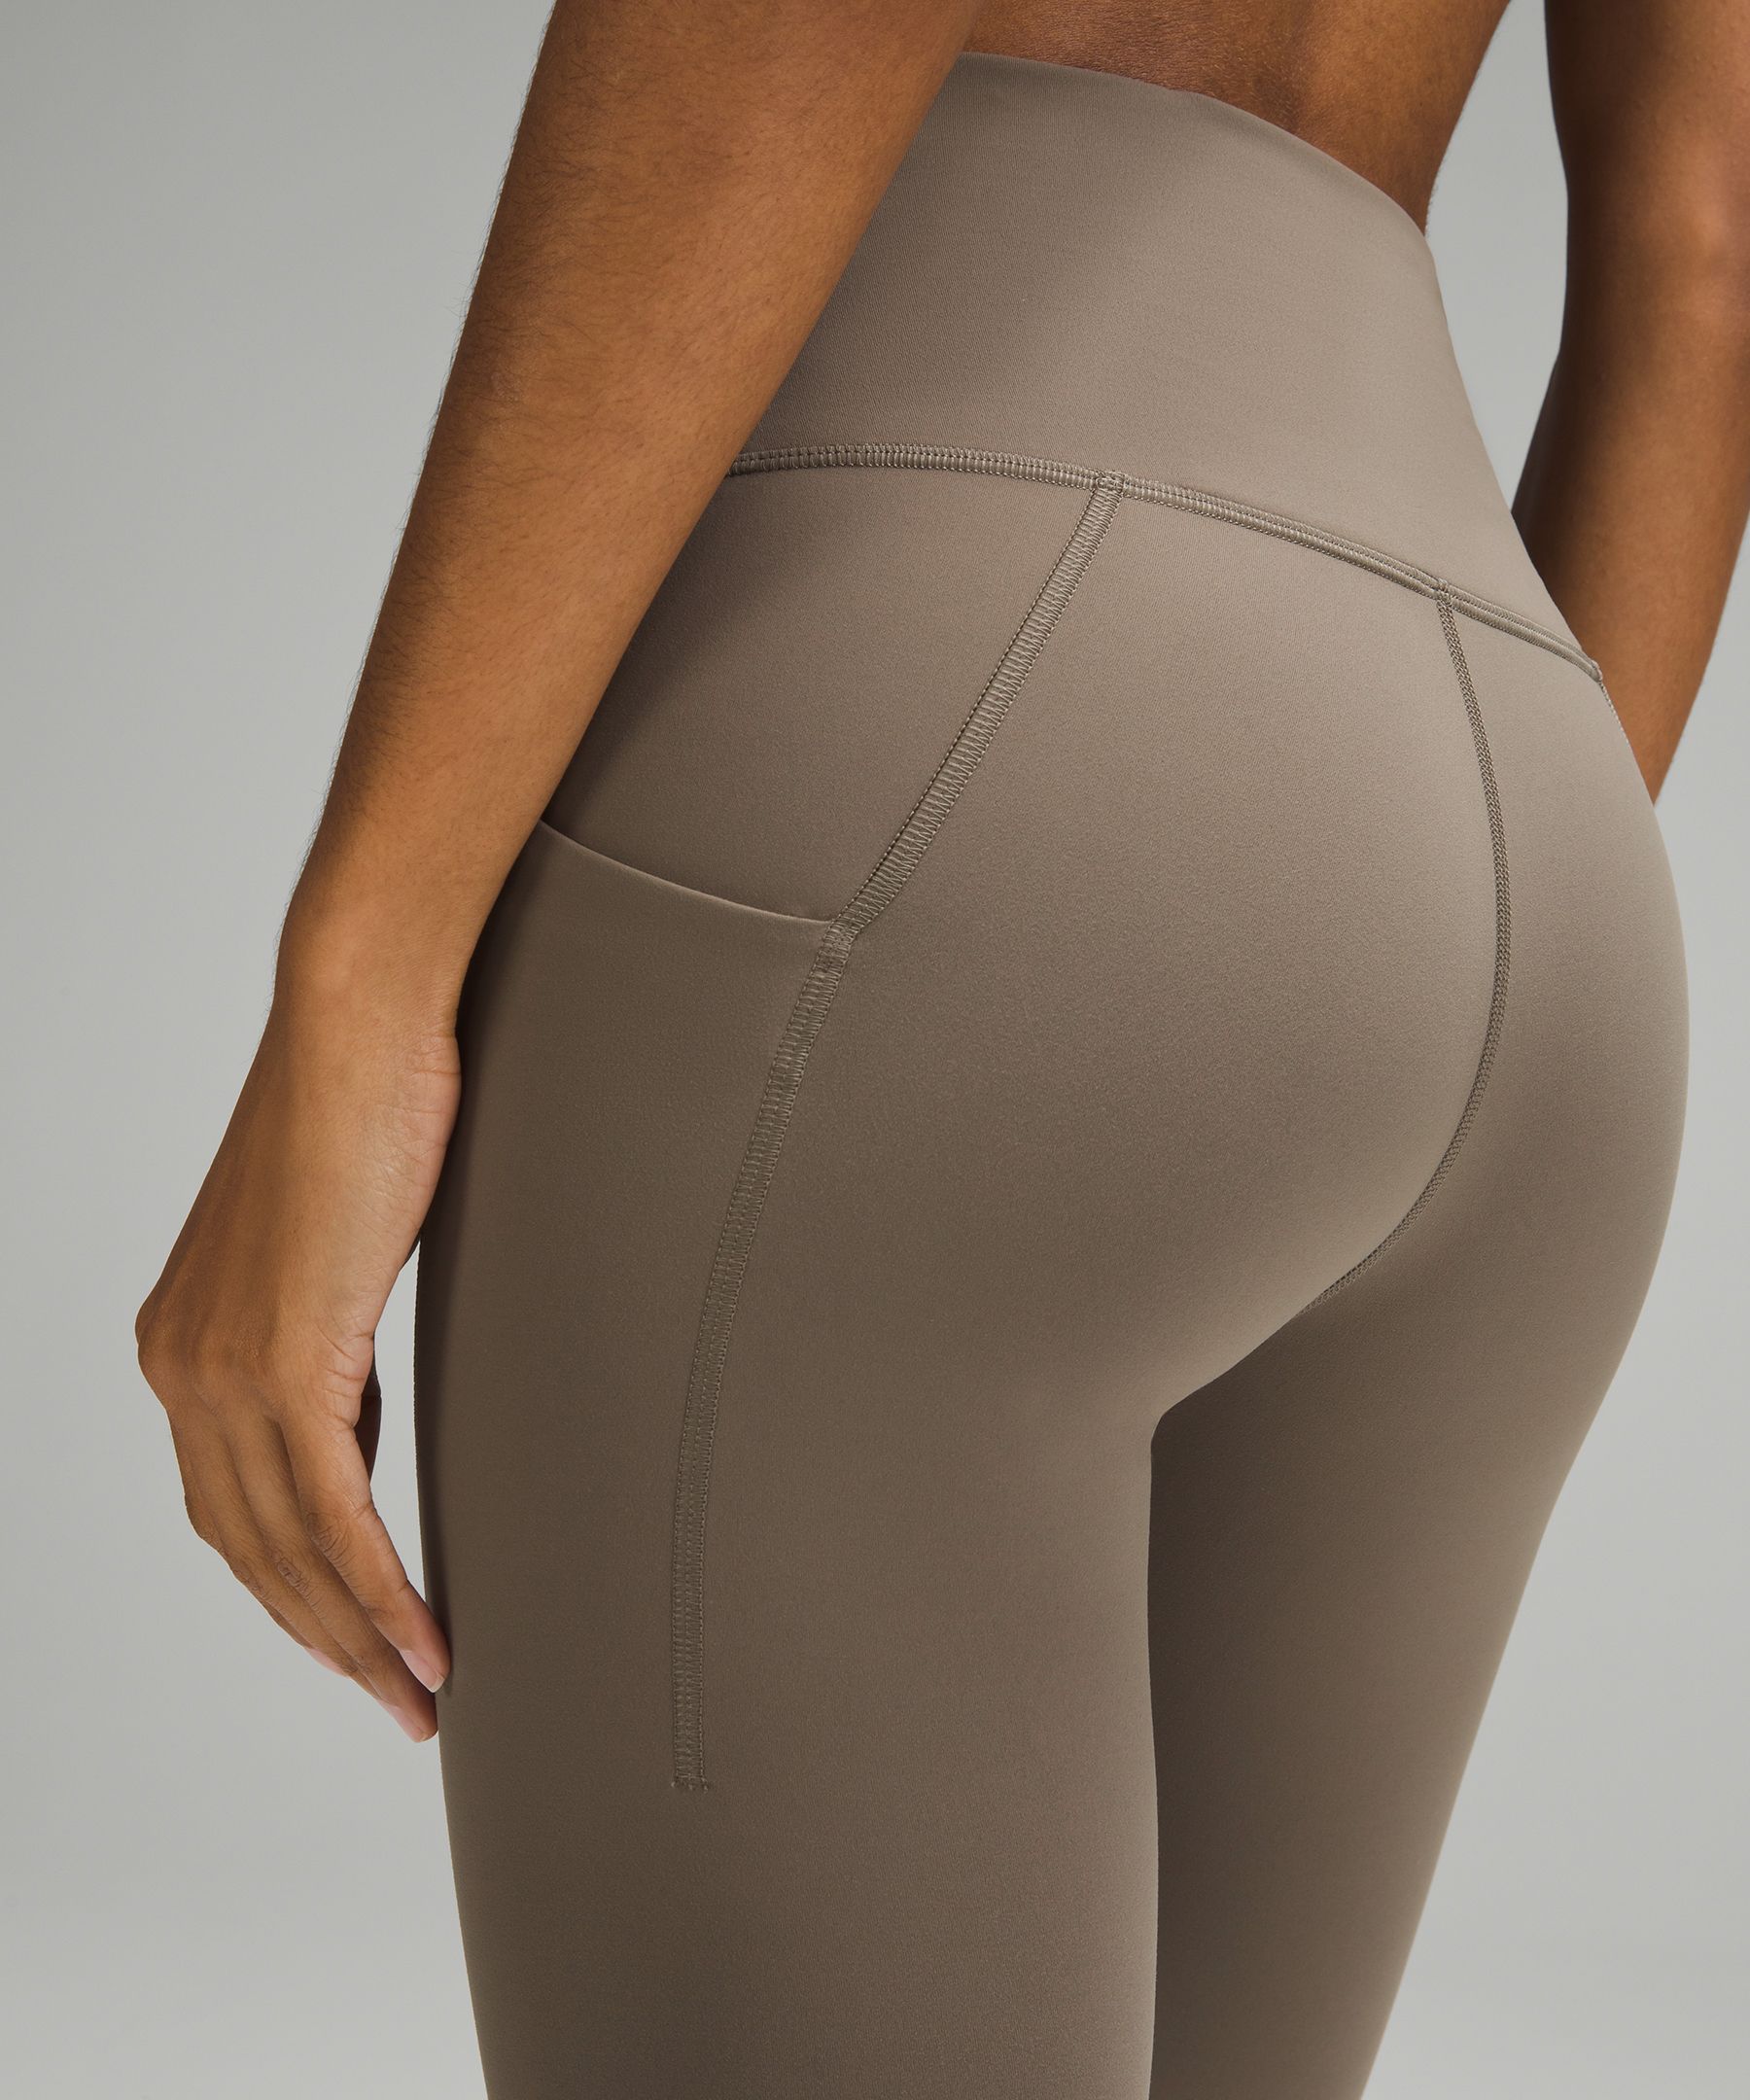 lululemon athletica Wunder Train High-rise Crop With Pockets 23